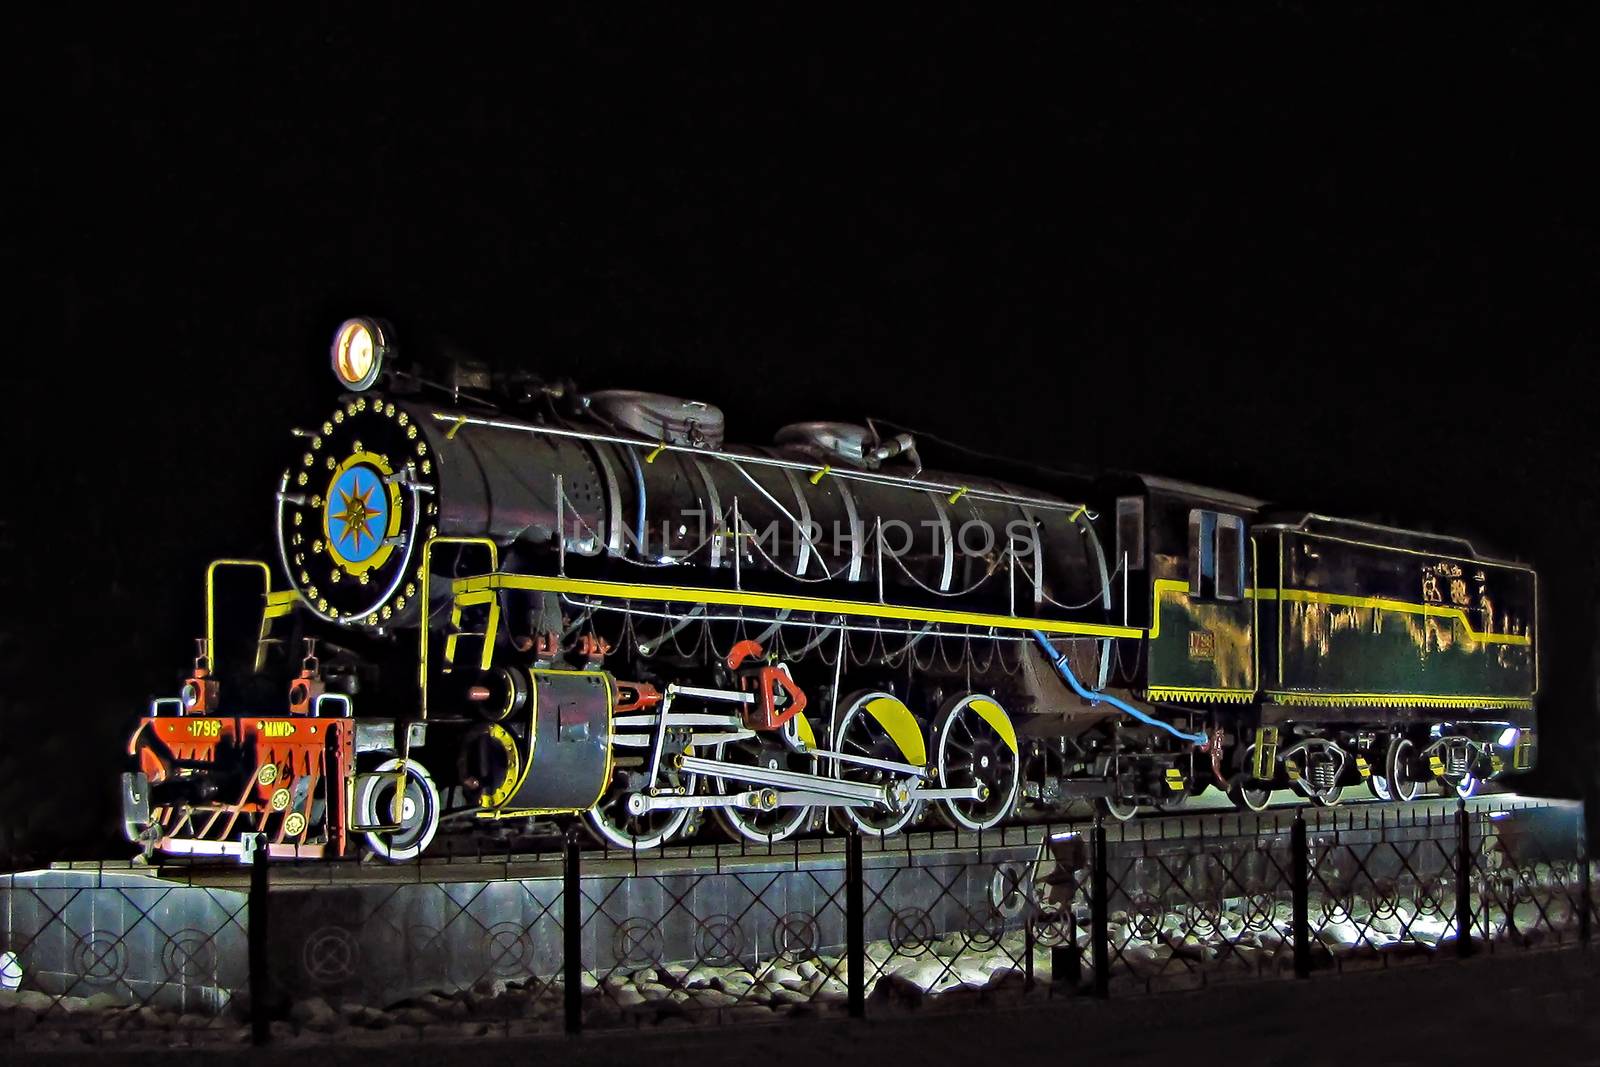 Night image of a steam locomotive plinth-ed in front of New Jalpaiguri station, West Bengal, India. WD class steam locomotive manufactured by Baldwin Loco Works, USA.  It was in the service from 1948 to 1993.